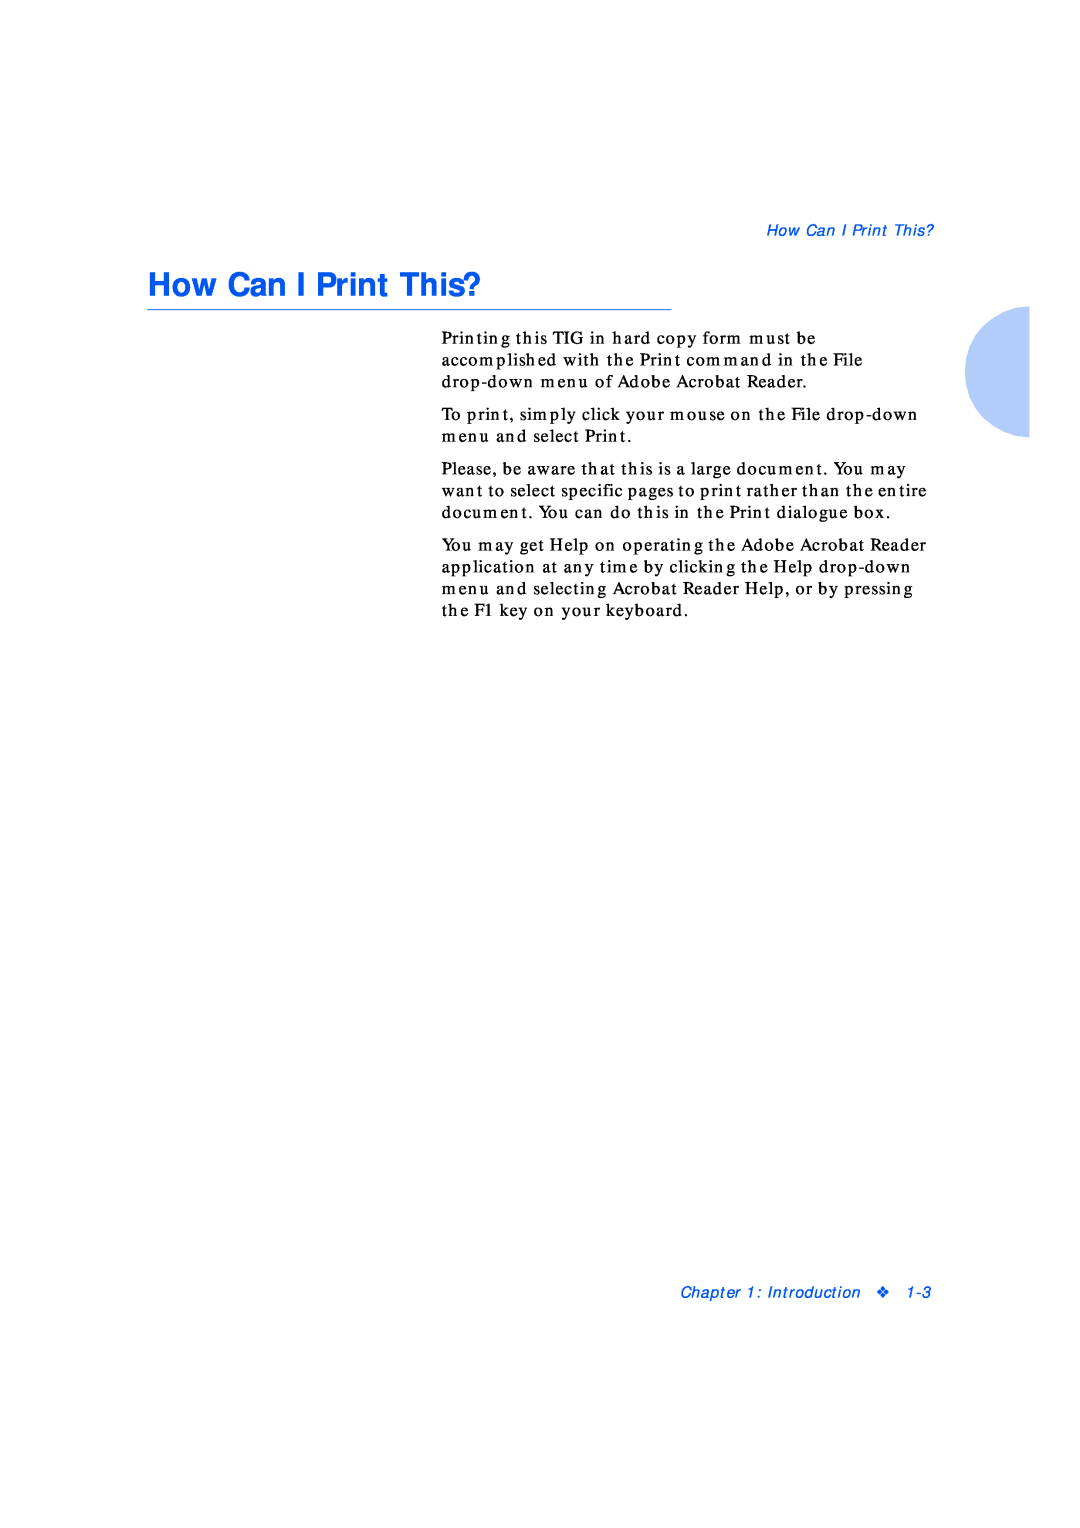 Xerox Network Laser Printers manual How Can I Print This?, Introduction 